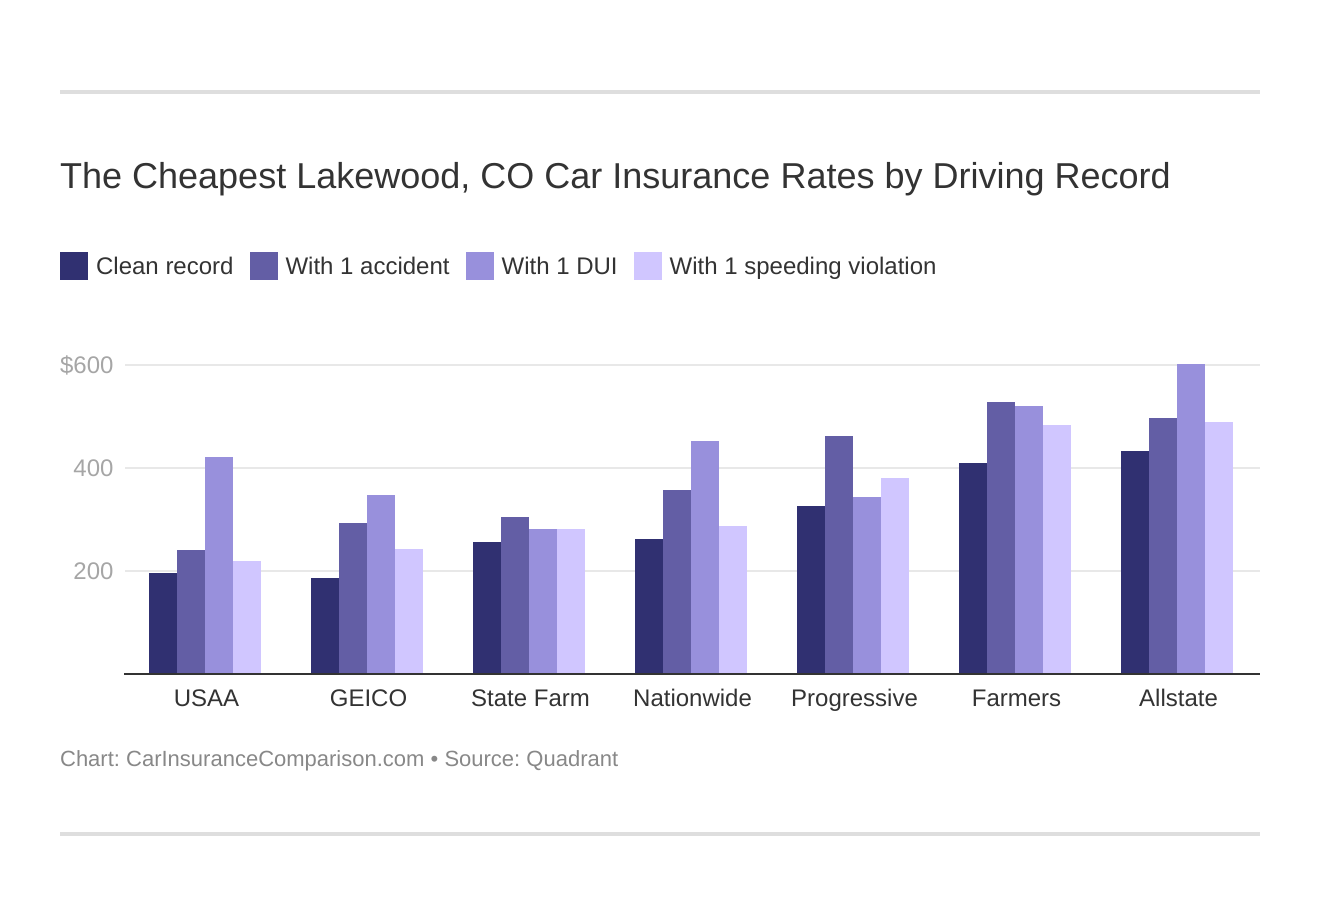 The Cheapest Lakewood, CO Car Insurance Rates by Driving Record